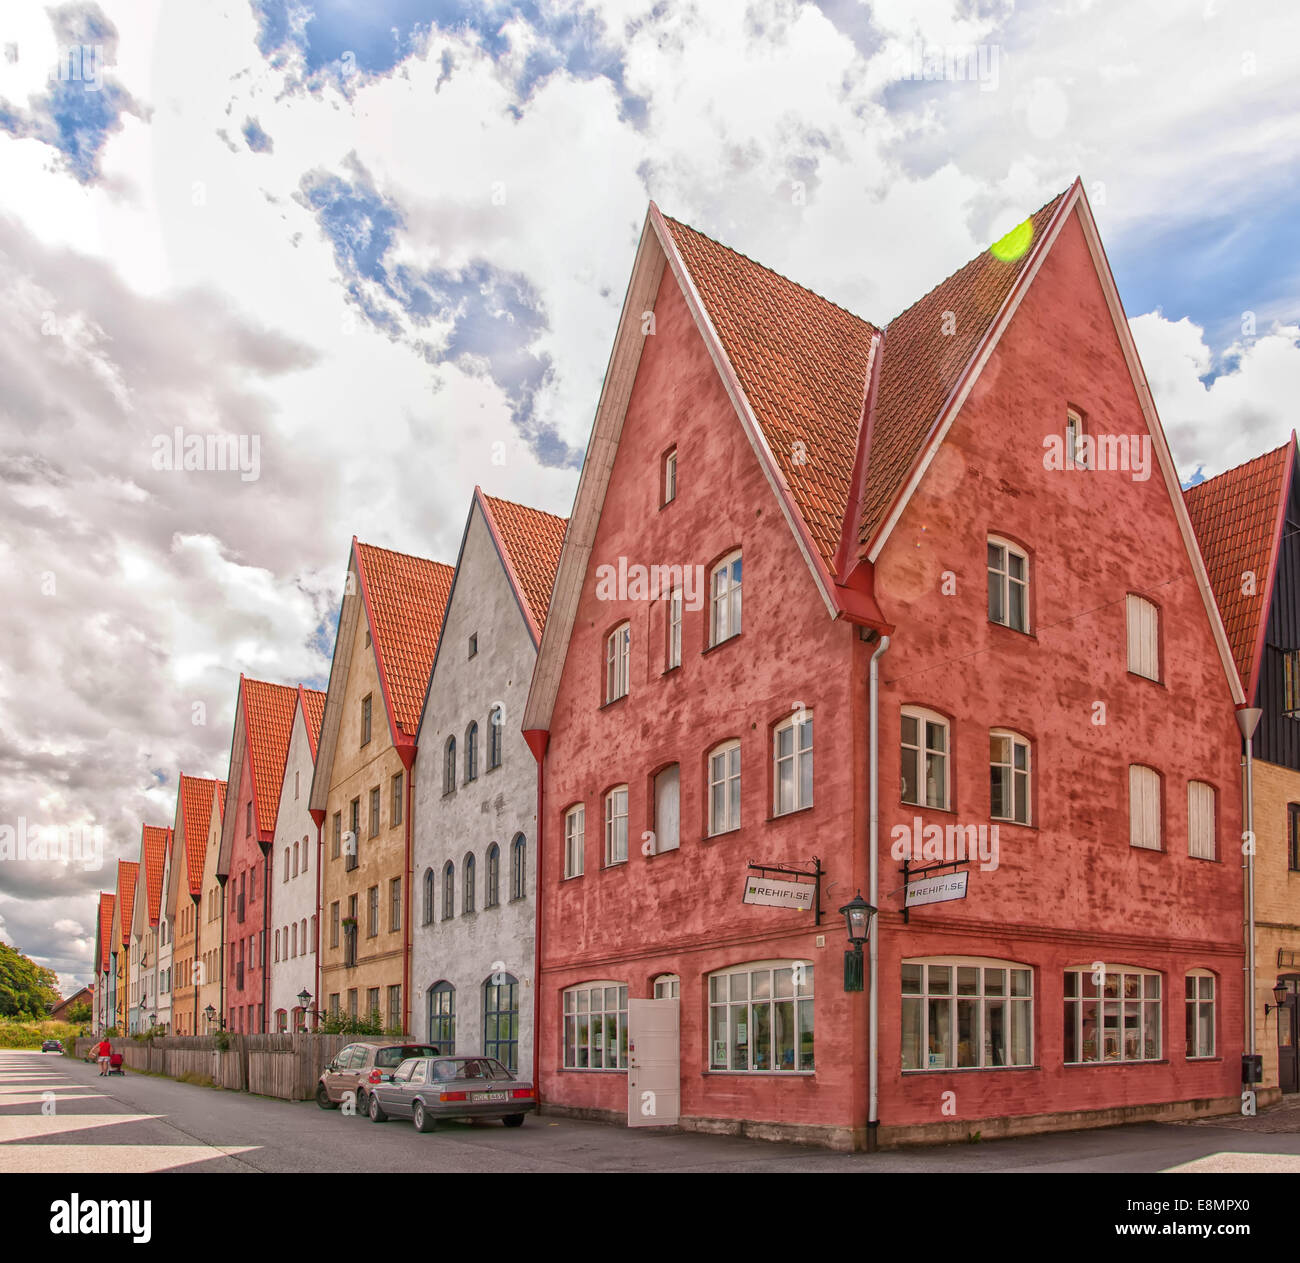 Picture of street in Jakriborg, Sweden on June 24, 2014. Jakriborg is a new classical housing project Stock Photo